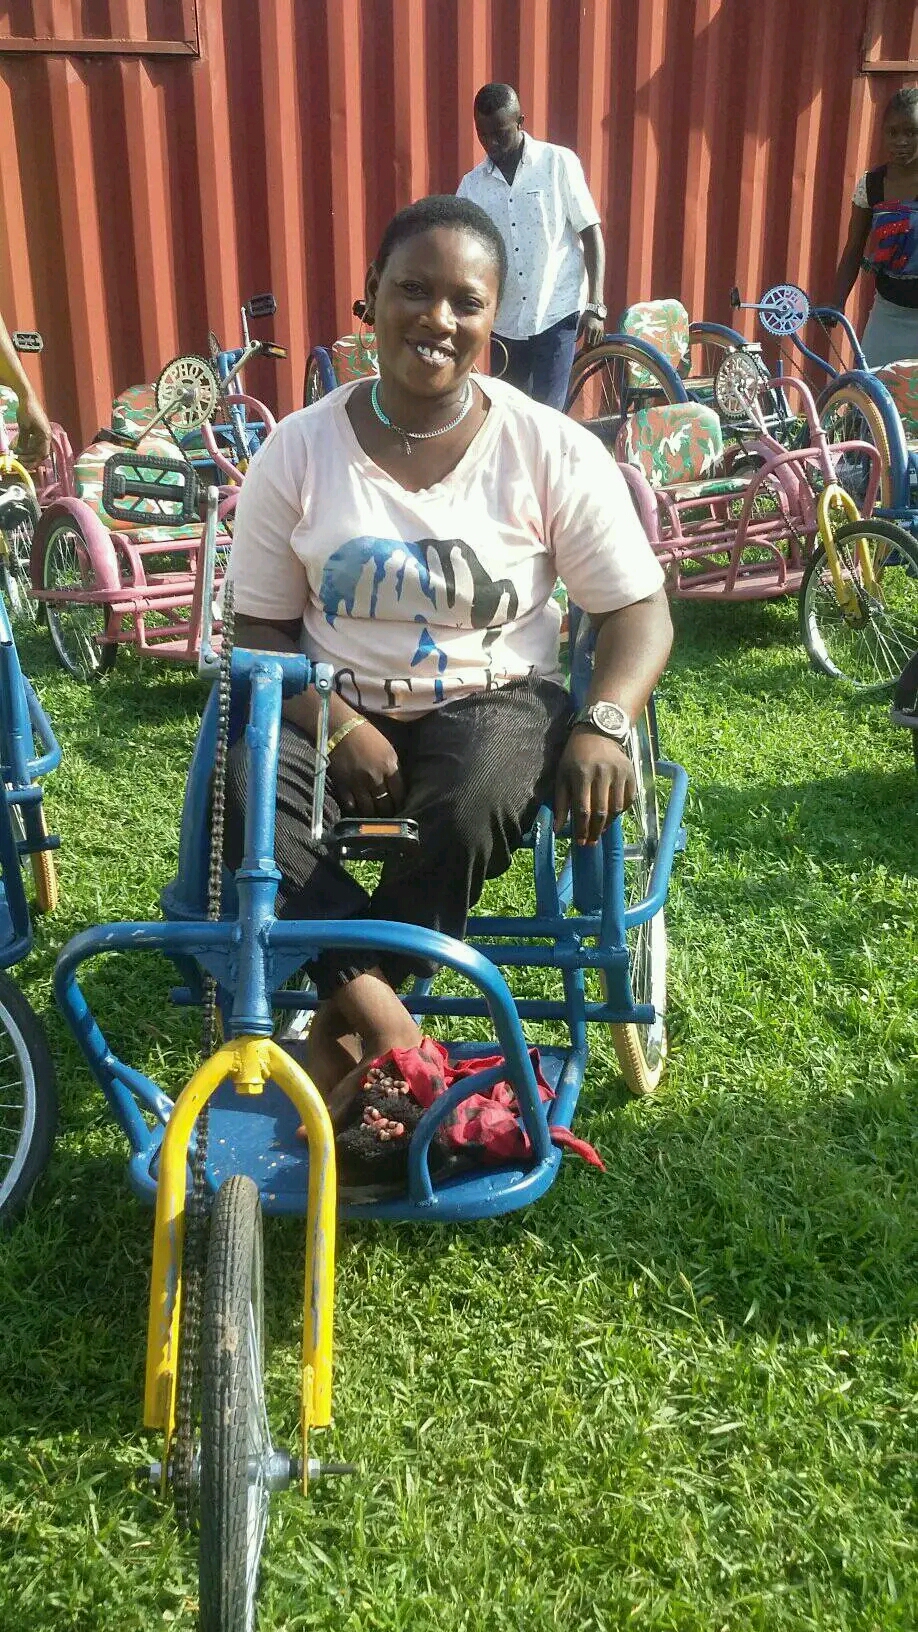 Beautiful Gate Handicapped People Center Jos challenge people living with disability to be productive, distributing 50 wheelchairs